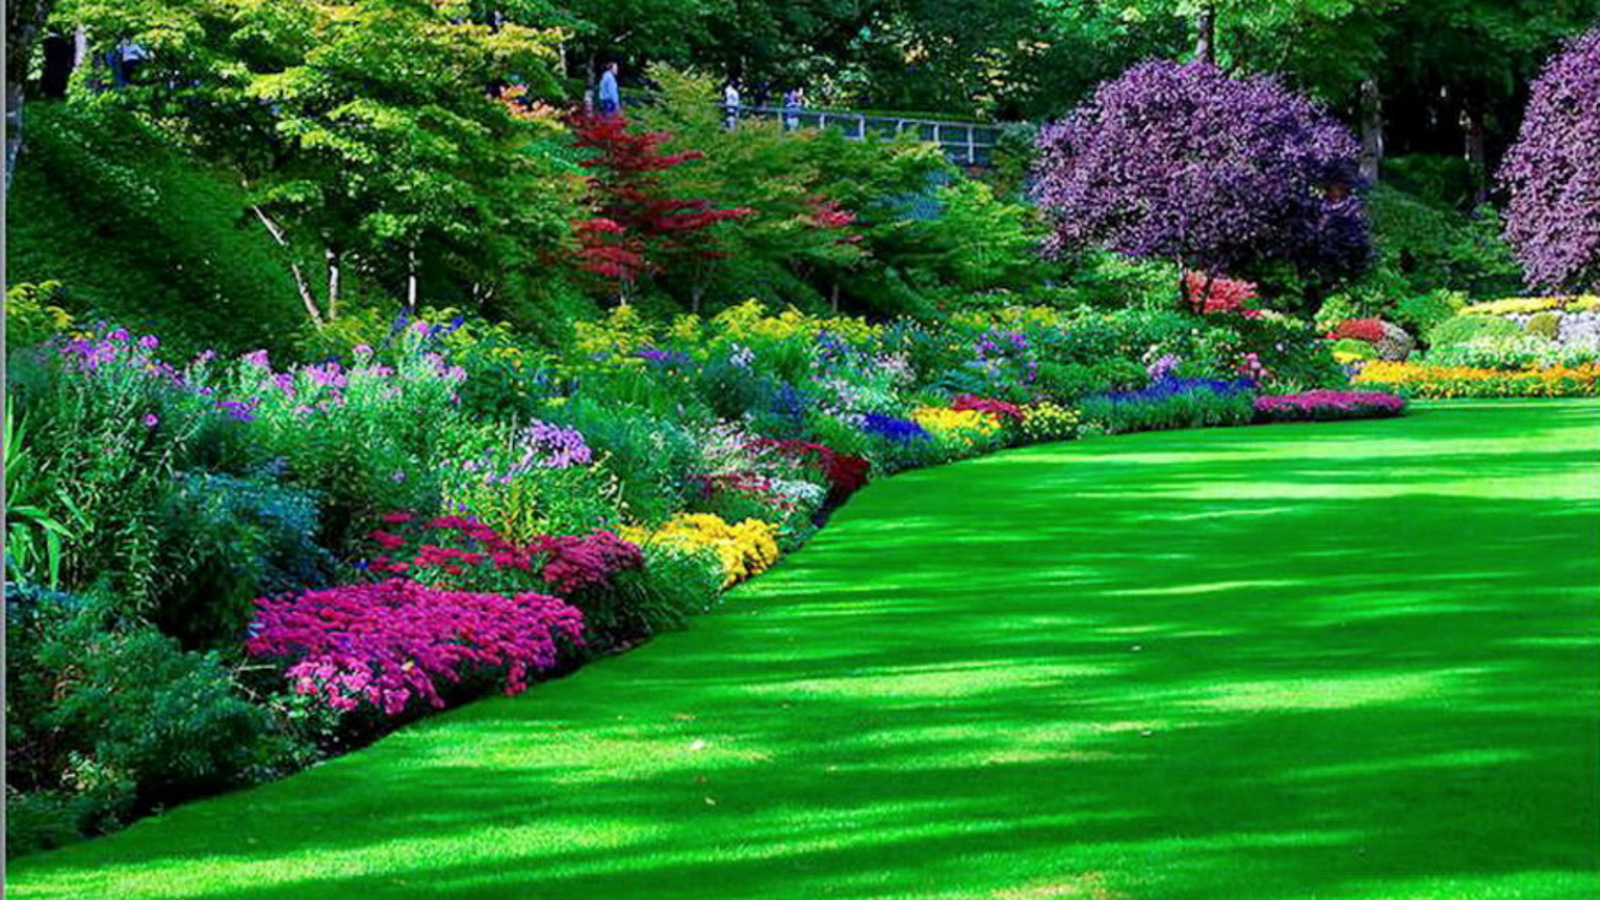 Garden images HD Photos Live HD Wallpaper HQ Pictures